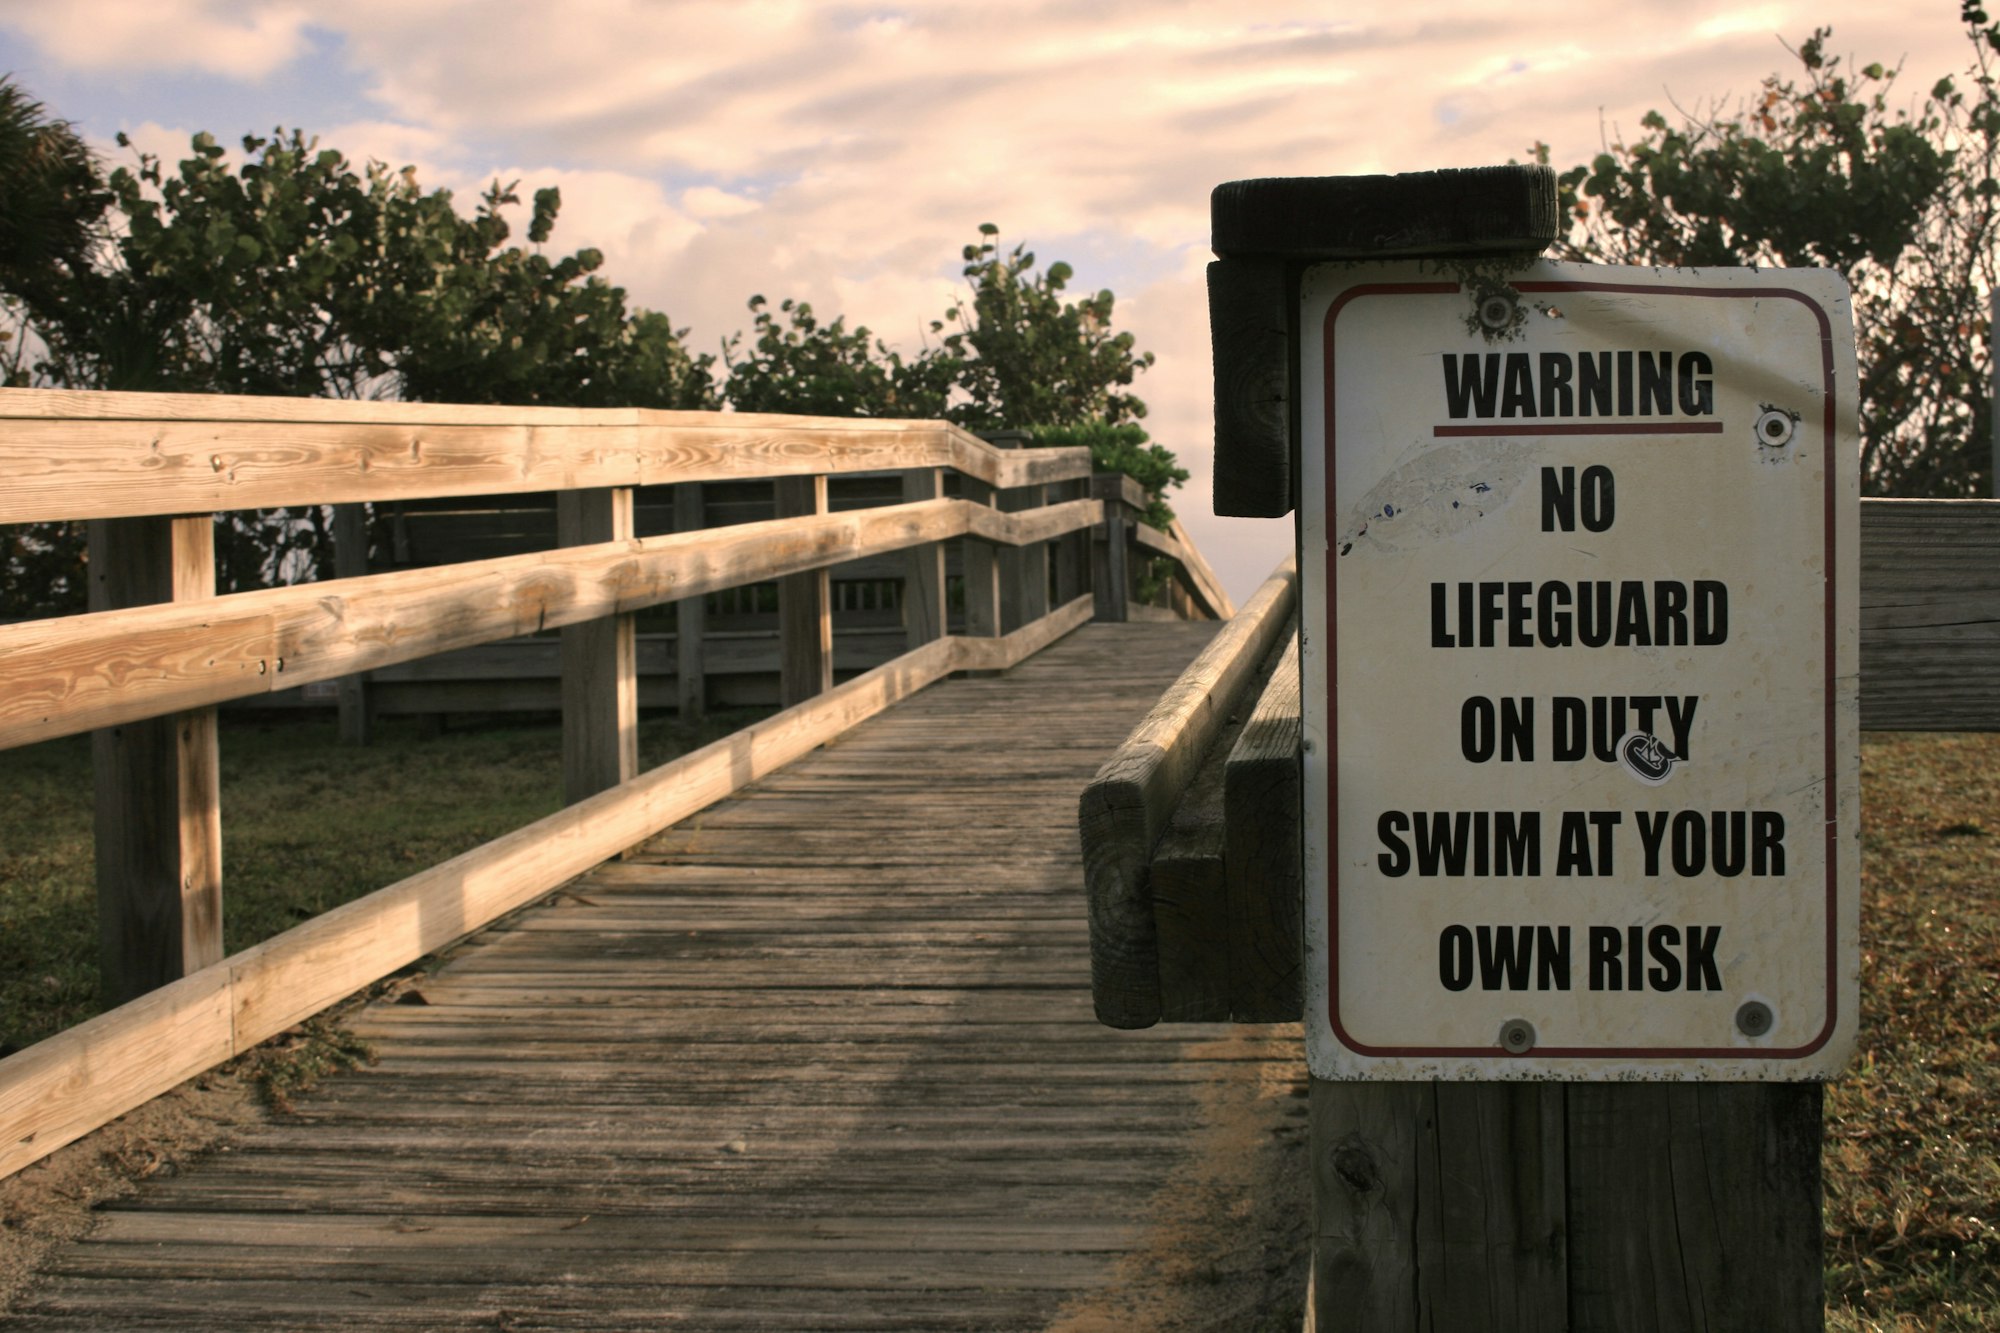 Warning: No lifeguard on duty swim at your own risk